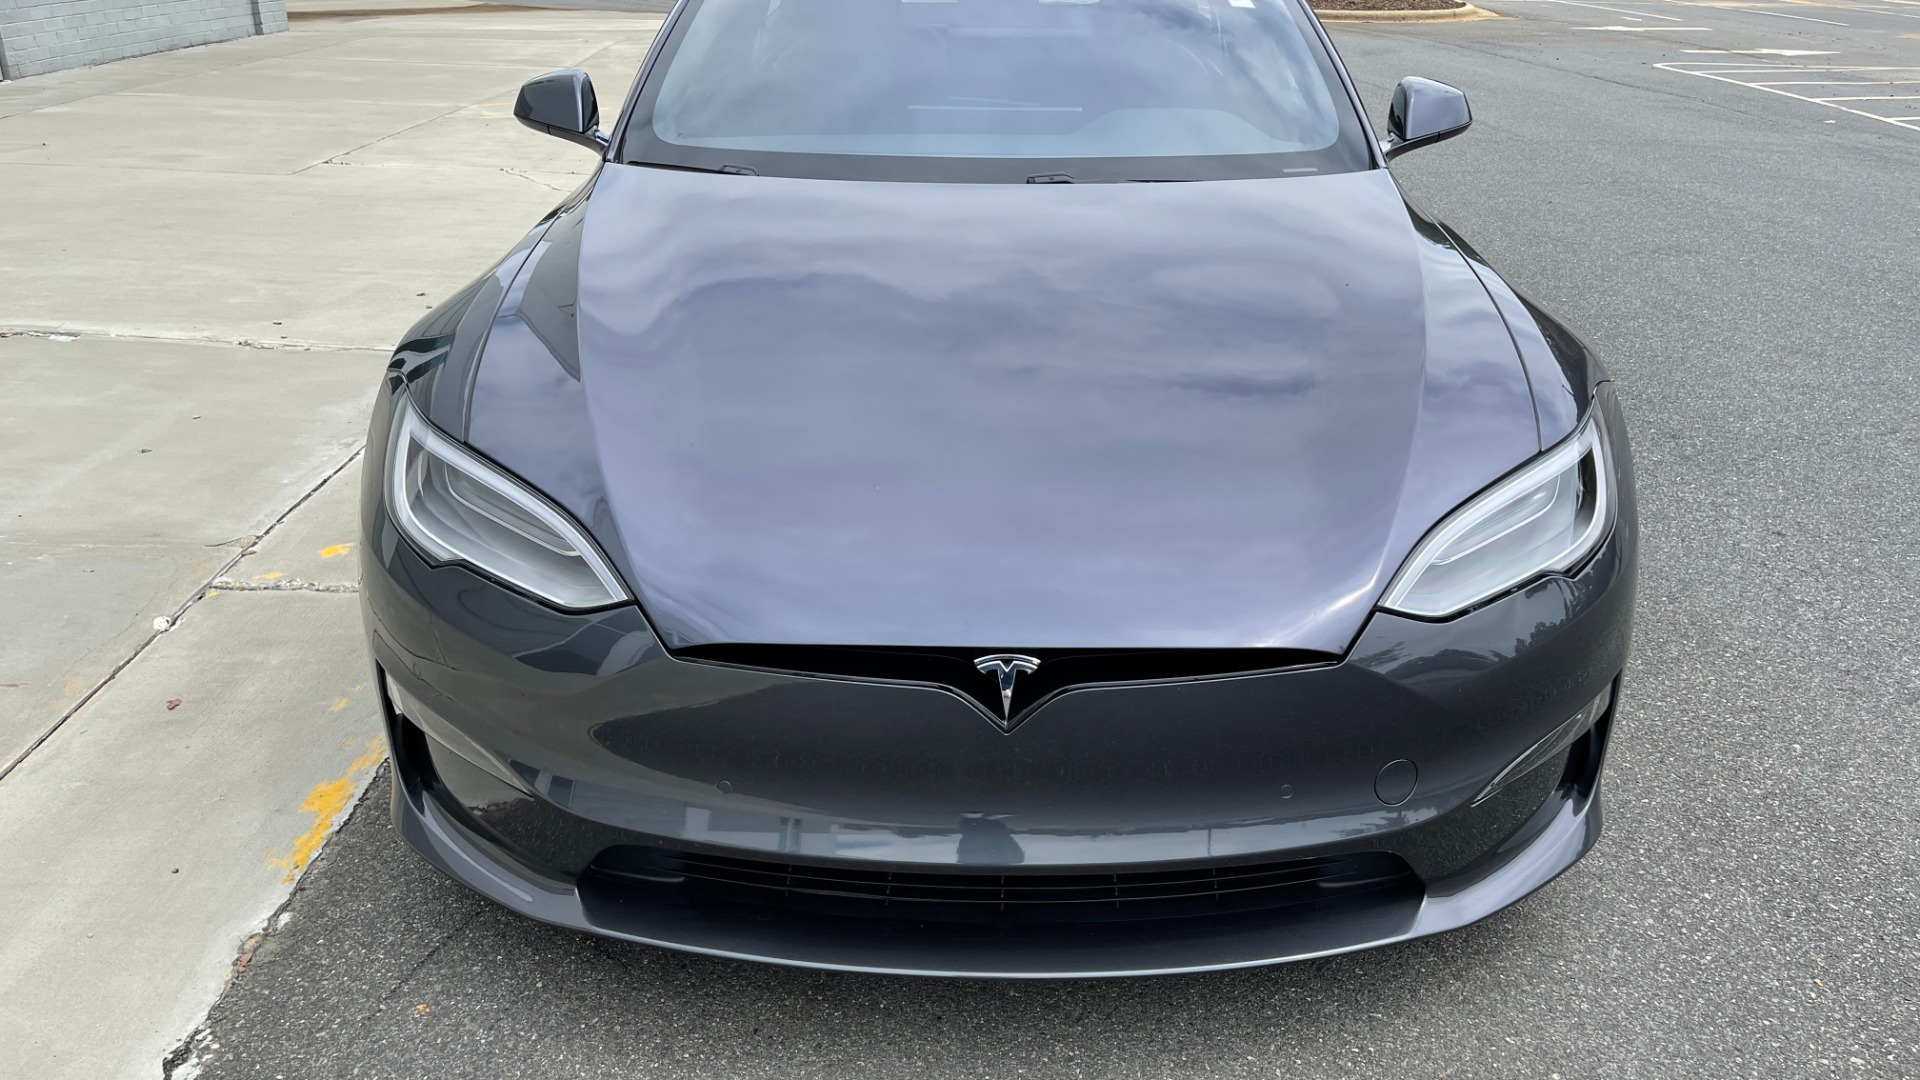 Used 2021 Tesla Model S Plaid / FULL SELF DRIVING / 21IN WHEELS / CARBON FIBER TRIM / PREMIUM CONNE for sale $105,000 at Formula Imports in Charlotte NC 28227 5